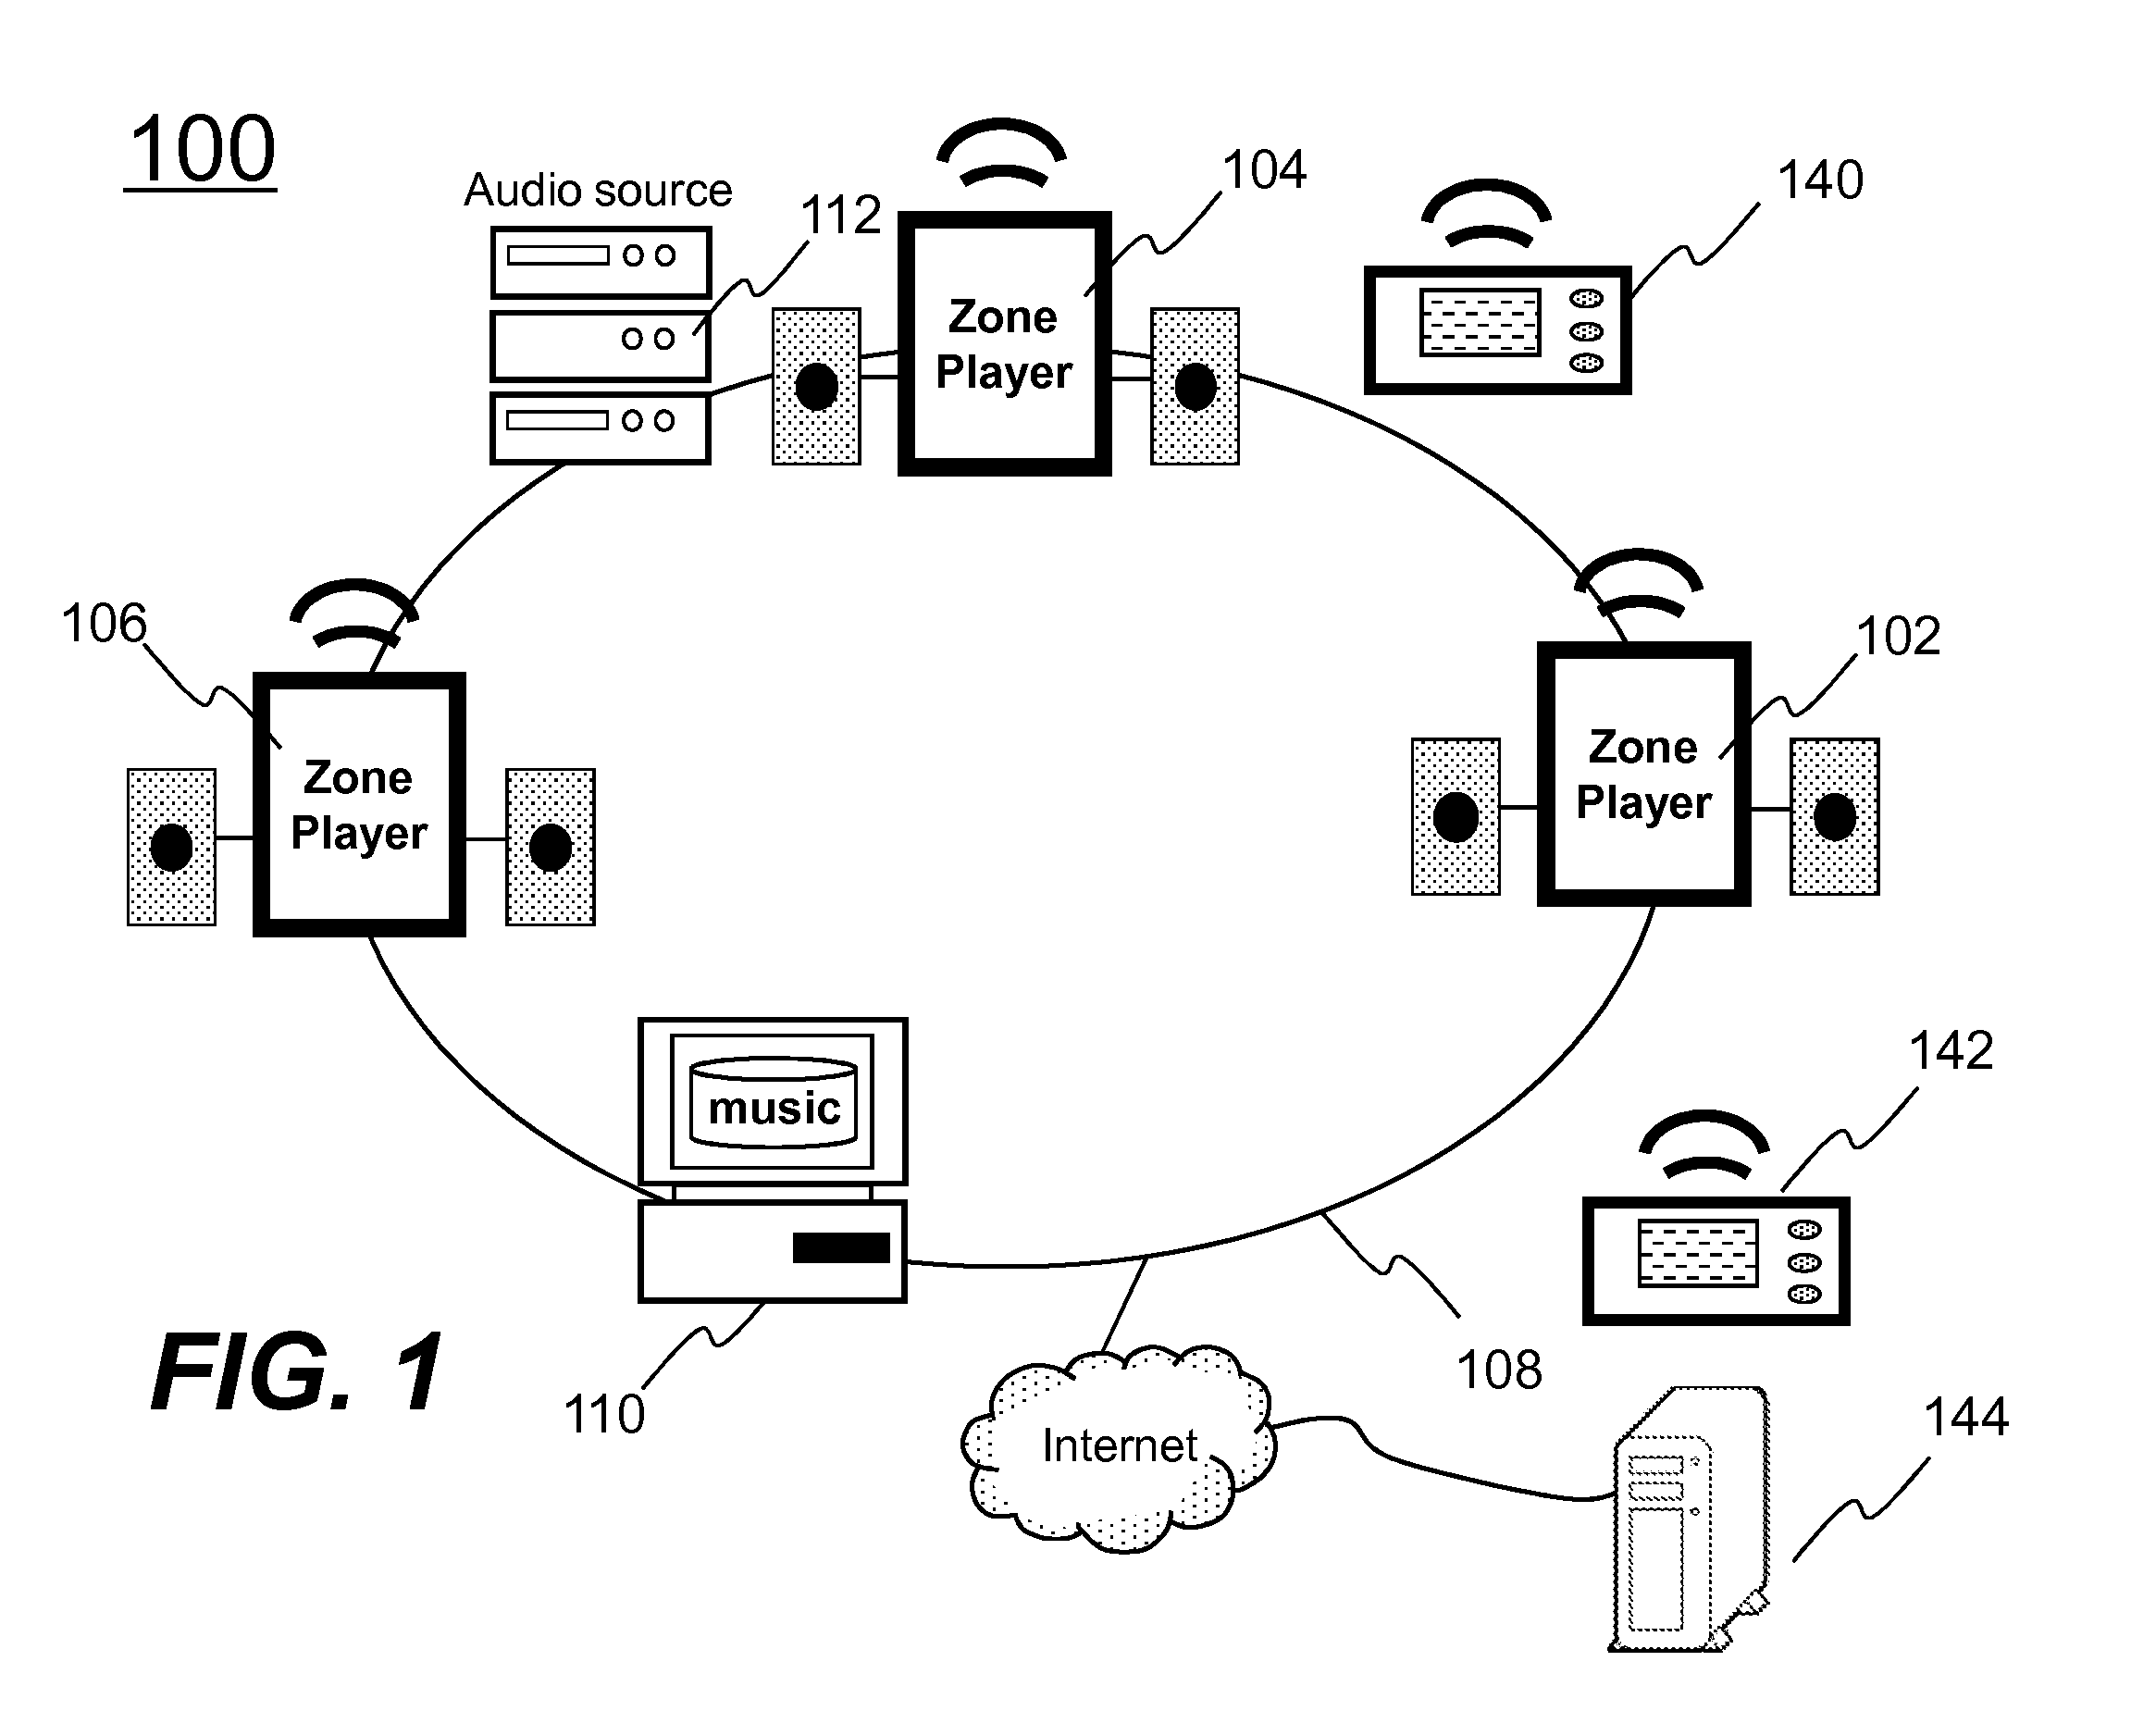 Method and apparatus for collecting diagnostic information